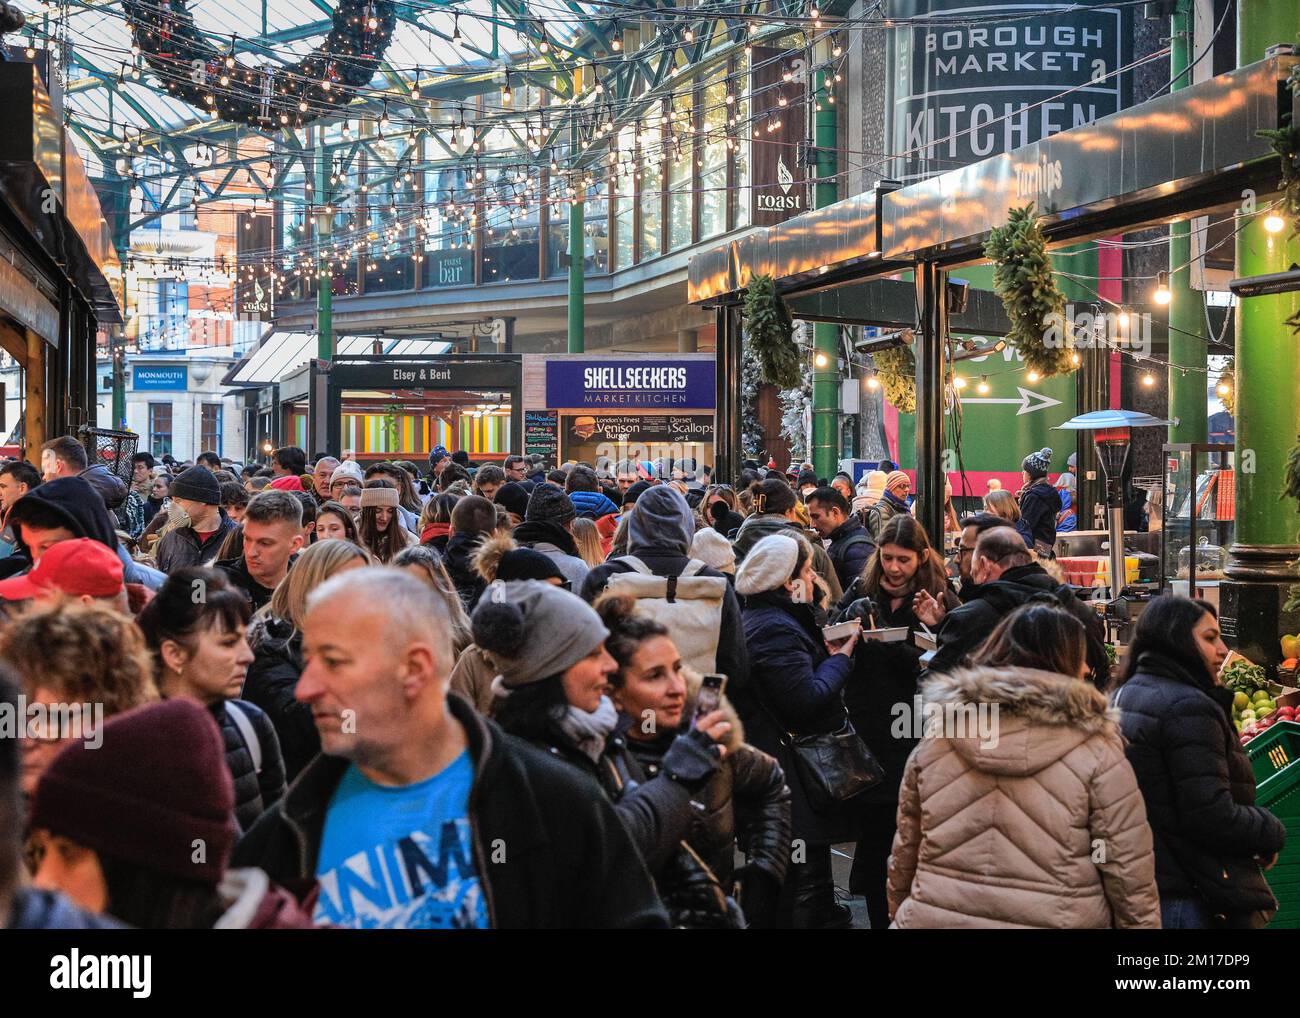 London, UK. 08th Dec, 2022. Festive shoppers, visitors and tourists crowd into the market halls at Borough Market to shop for artisan foods and stop for a mulled wine and other seasonal offerings. Credit: Imageplotter/Alamy Live News Stock Photo